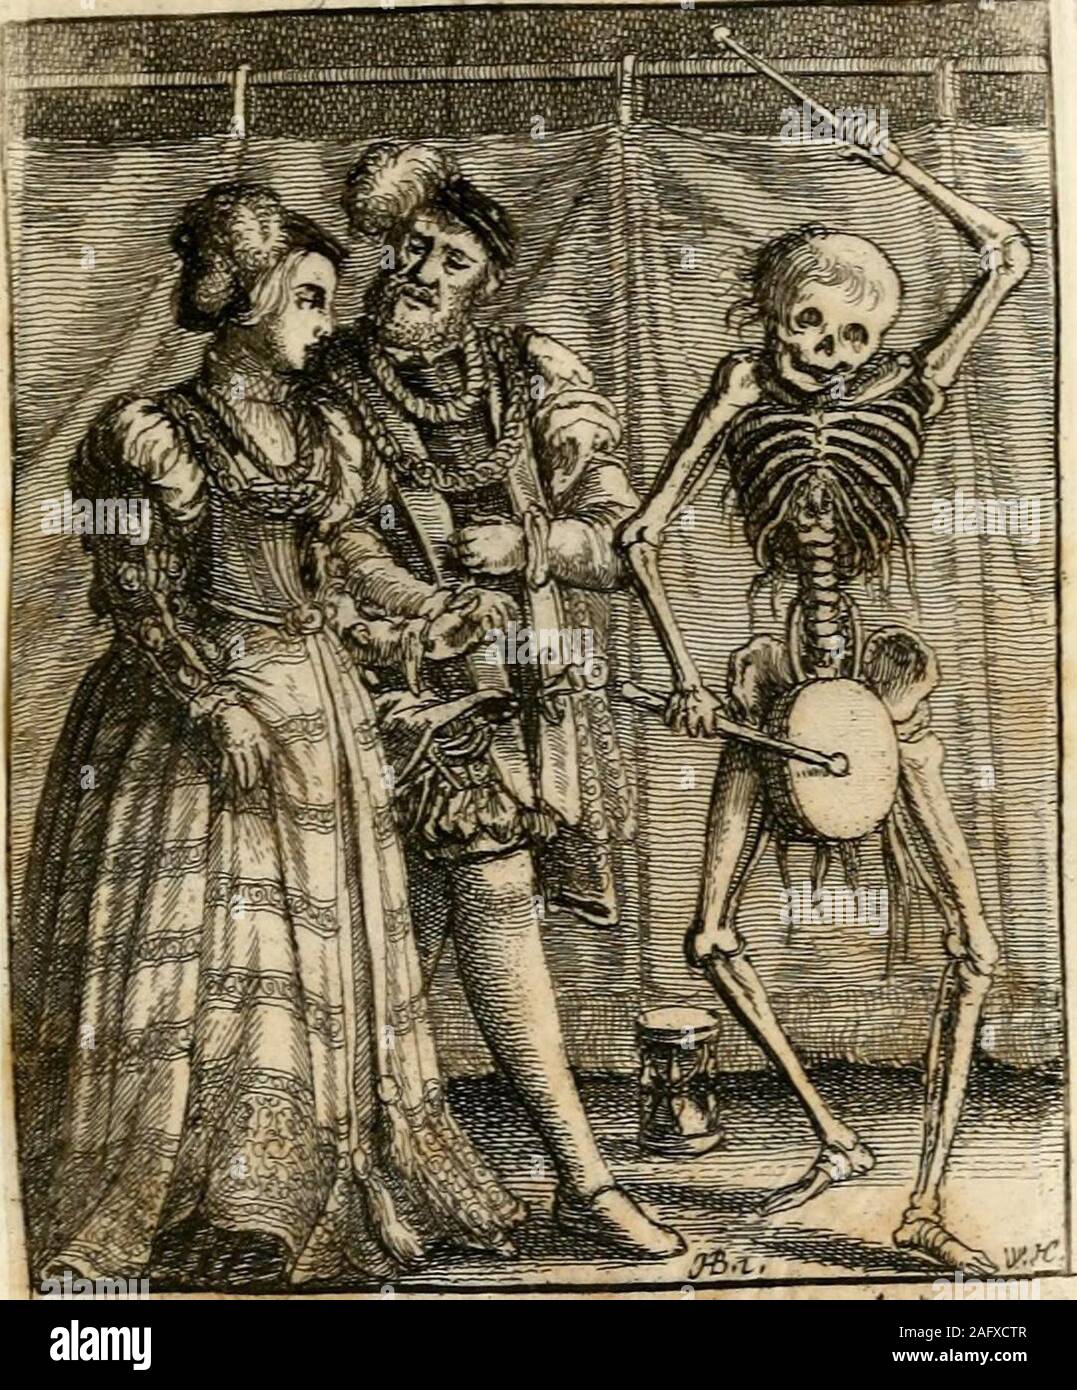 . The dance of death. no 7r^-rt£. 61 THE ADVOCATE. XX. THE rich client is seen putting a bribeinto the hands of the dishonest lawyer, towhich Death also contributes, but remindshim at the same time that his glass is runout. To this admonition he seems to paylittle regard, being altogether occupied incounting the money. Behind this groupestands the poor suitor, wringing his hands,and lamenting that his poverty disables himfrom coping with his powerful adversary. 62 THE NEW MARRIED COUPLE. XXI. THE happy couple, whom the churchhas just united, are admonished by the beatof Deaths drum, that they Stock Photo